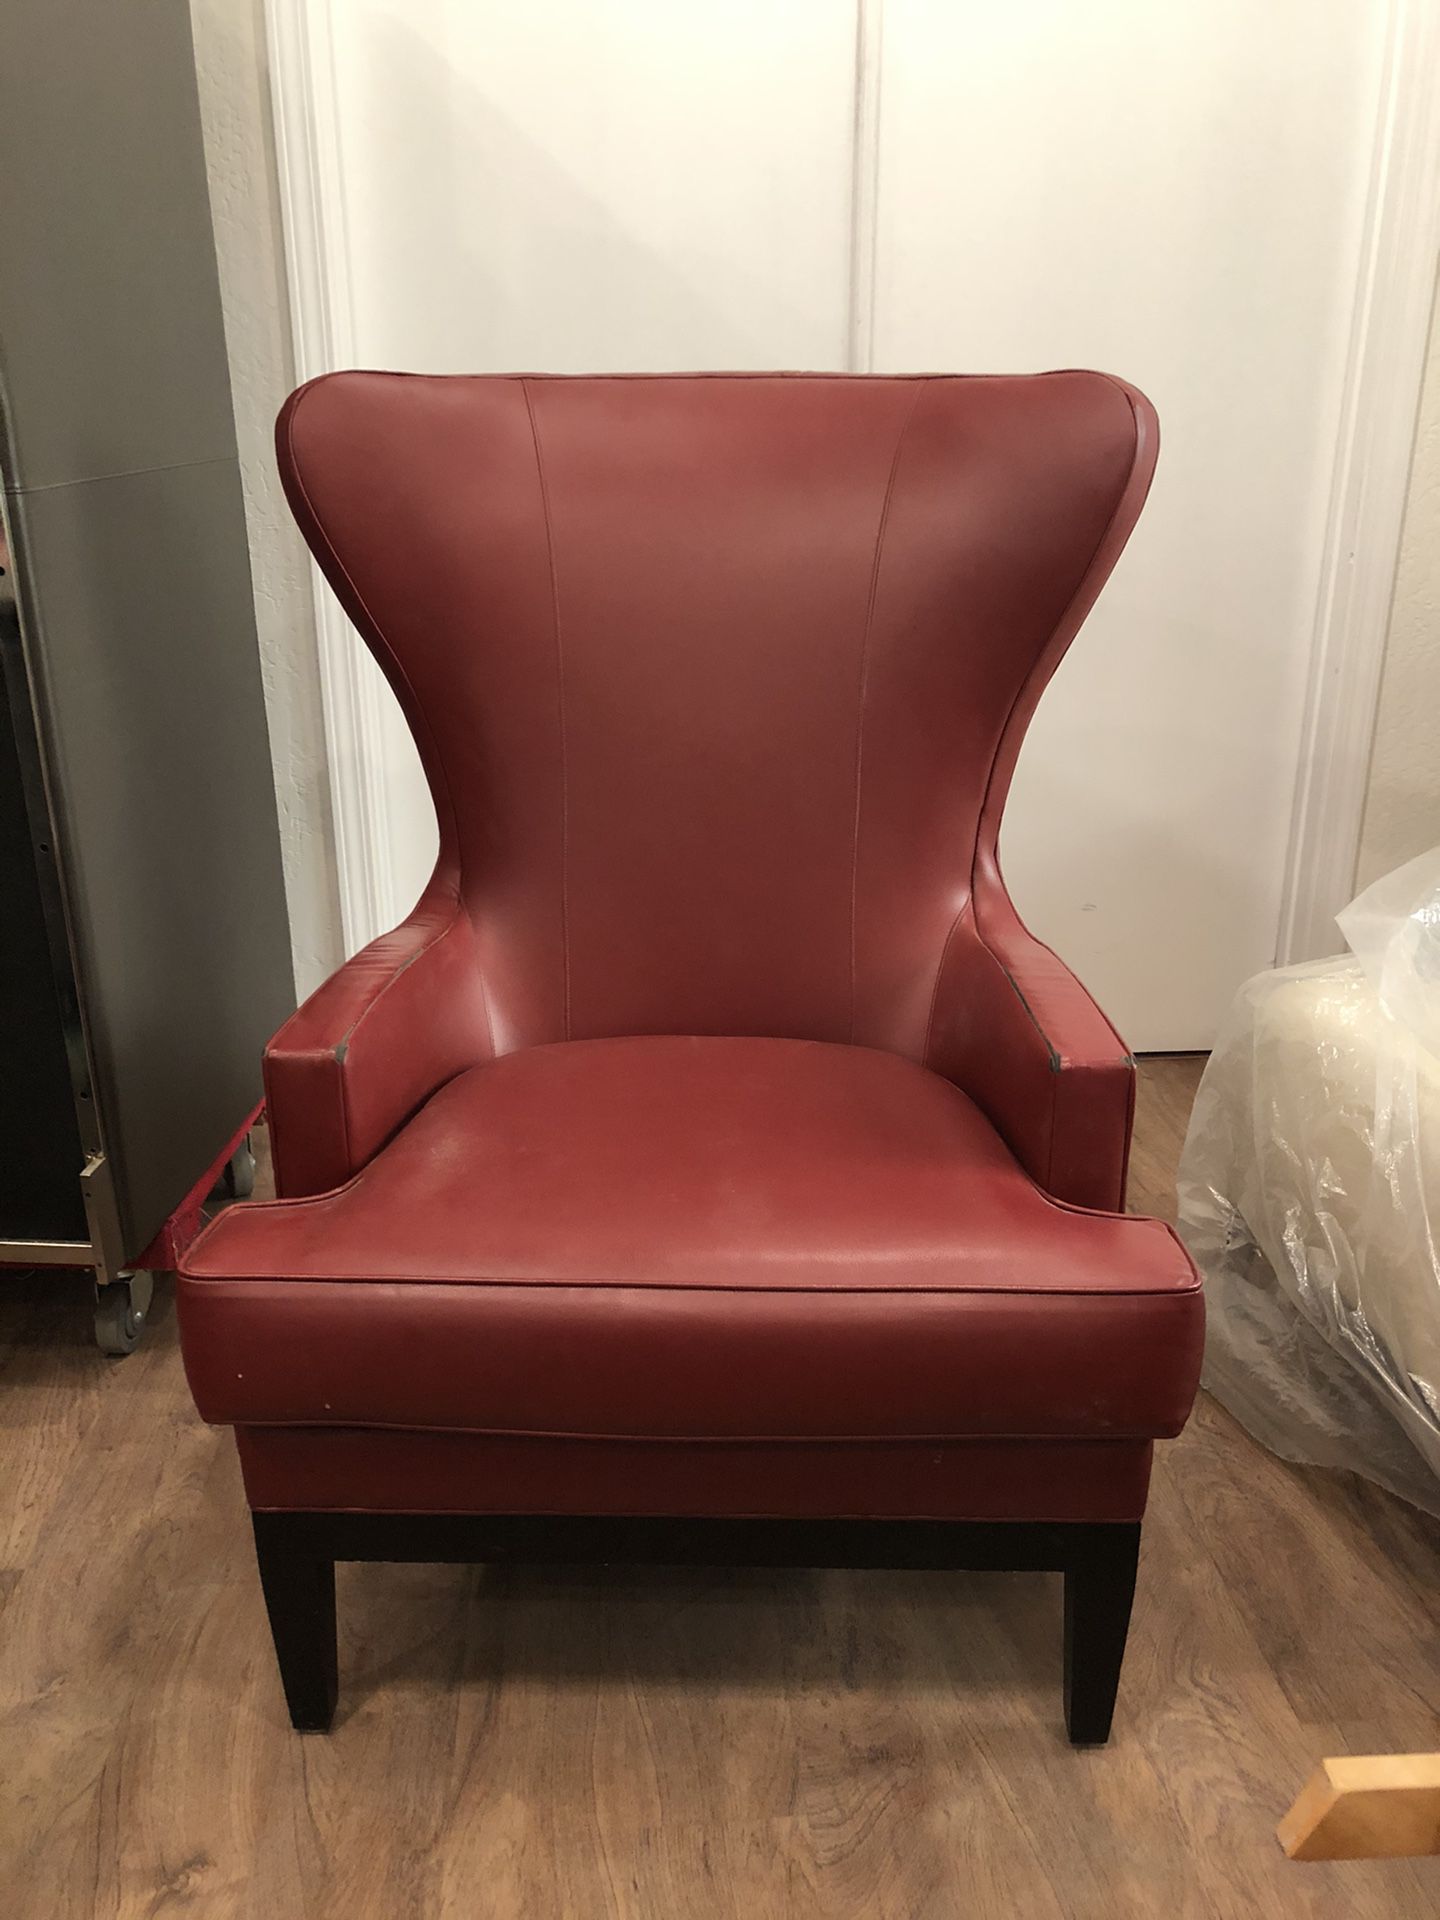 Faux leather chair